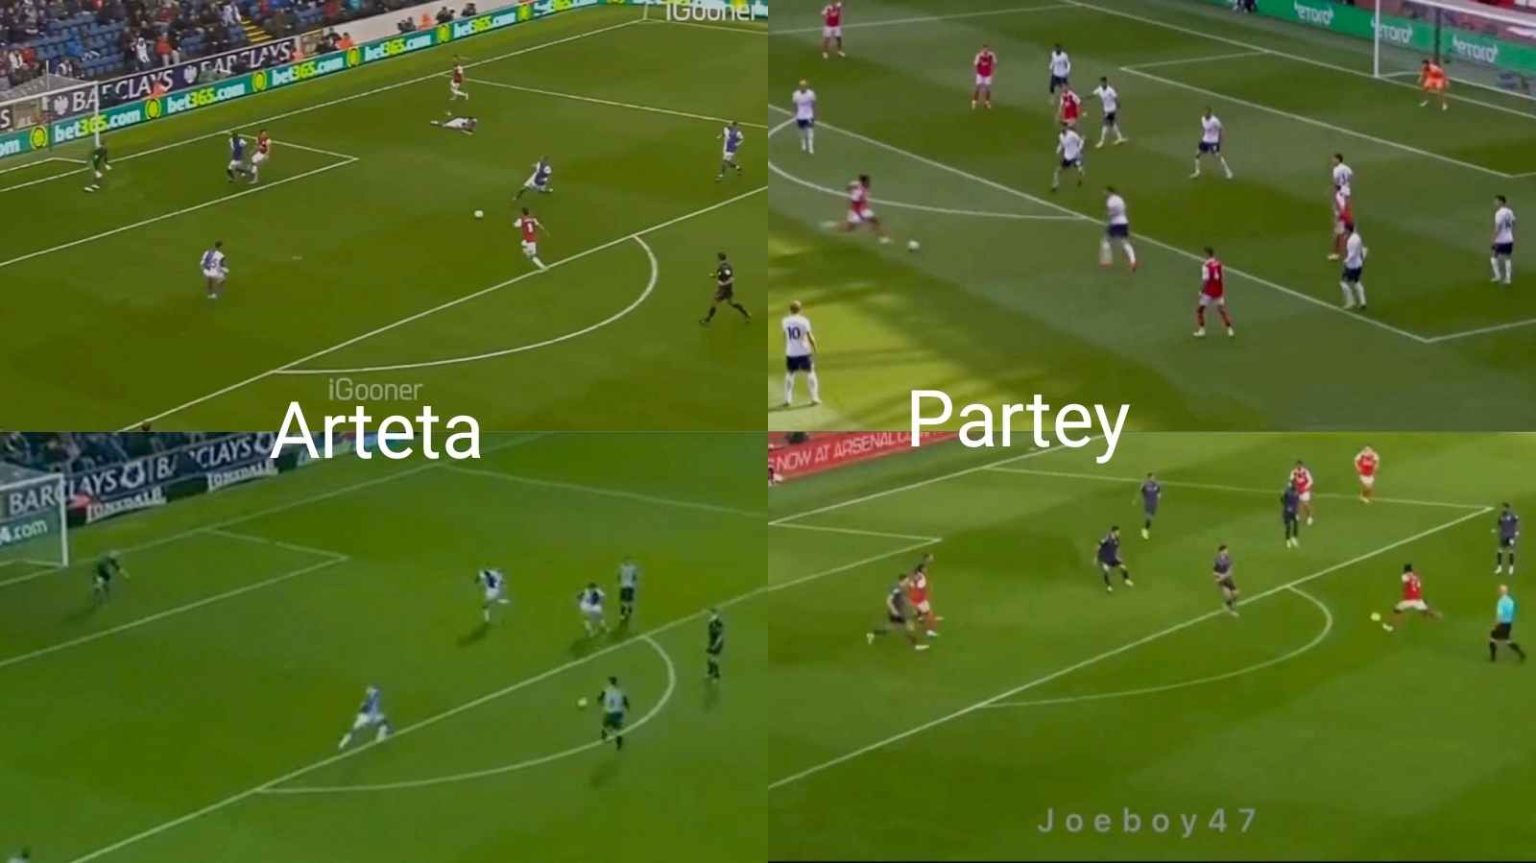 Watch: Partey's recent long range goals has Arteta written all over them, same technique used by Arteta during his playing days